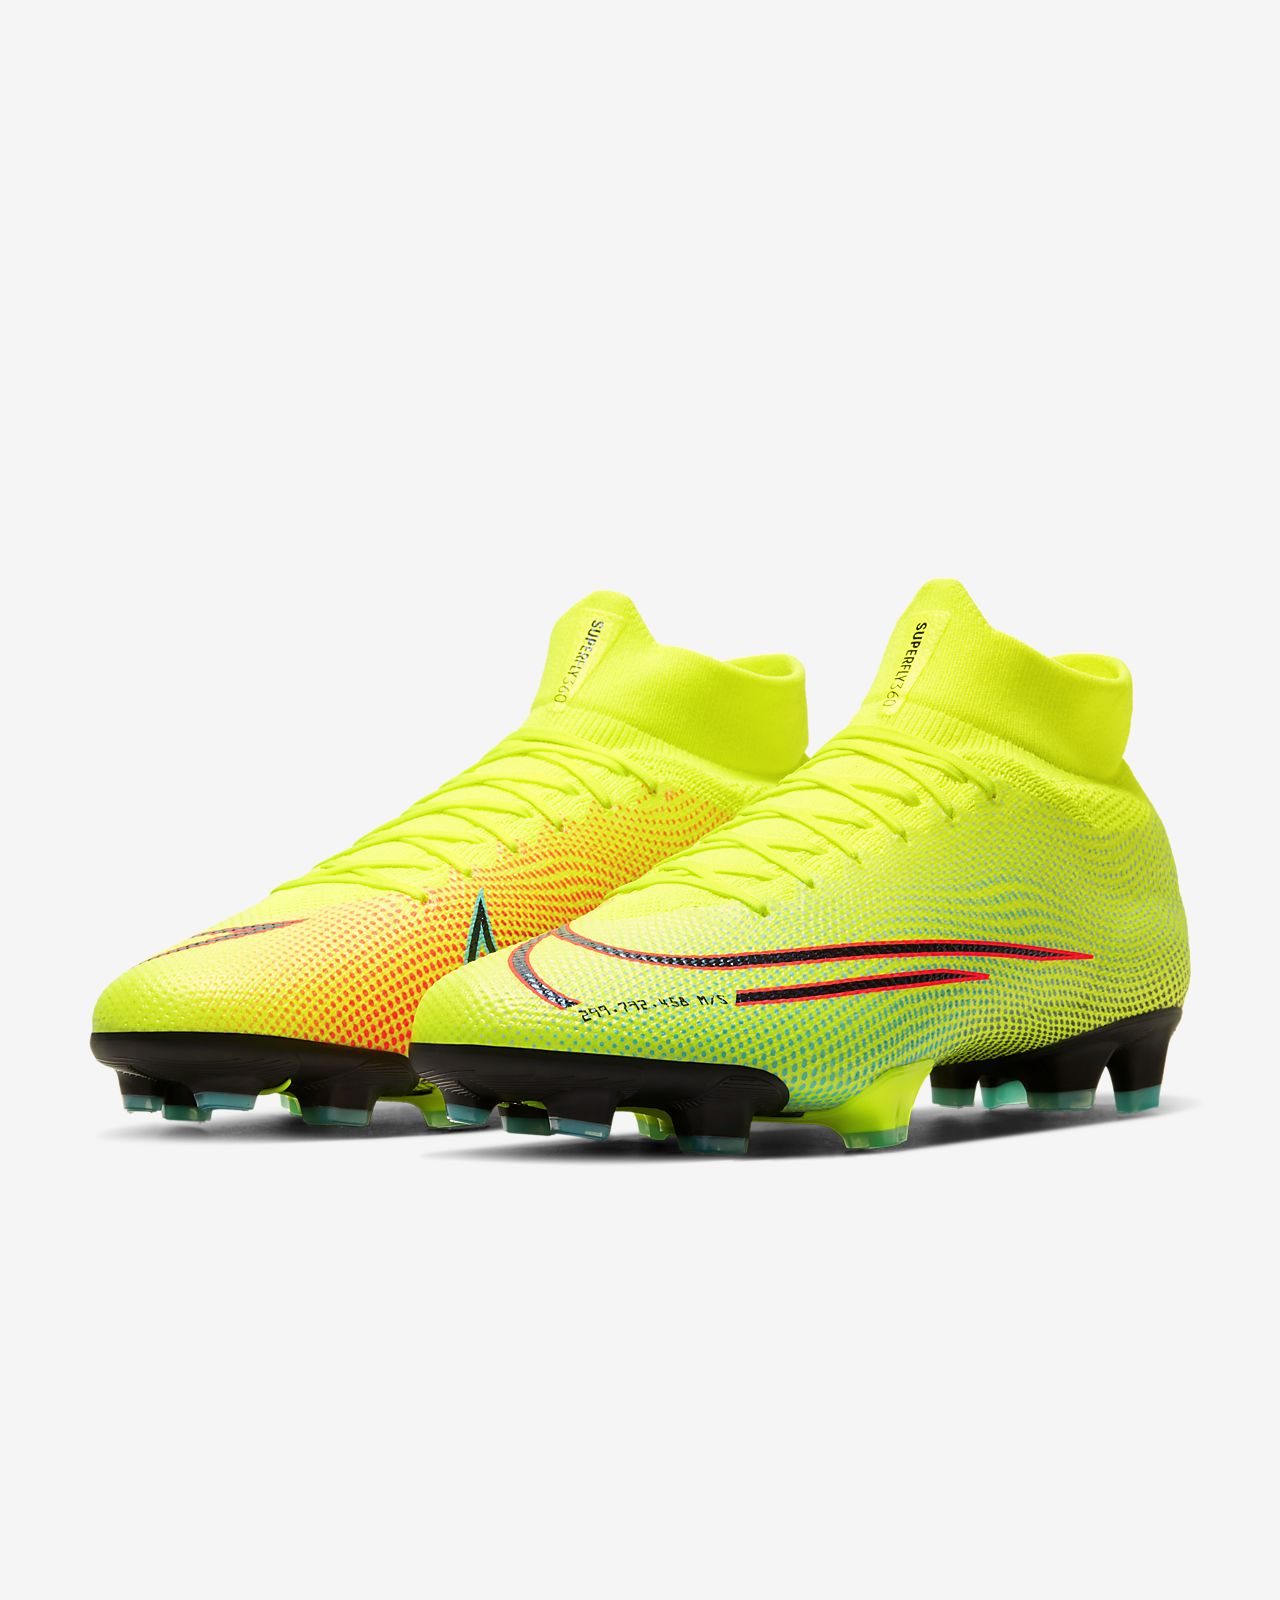 Nike Superfly 6 Pro LVL UP FG Football boots for terrain.